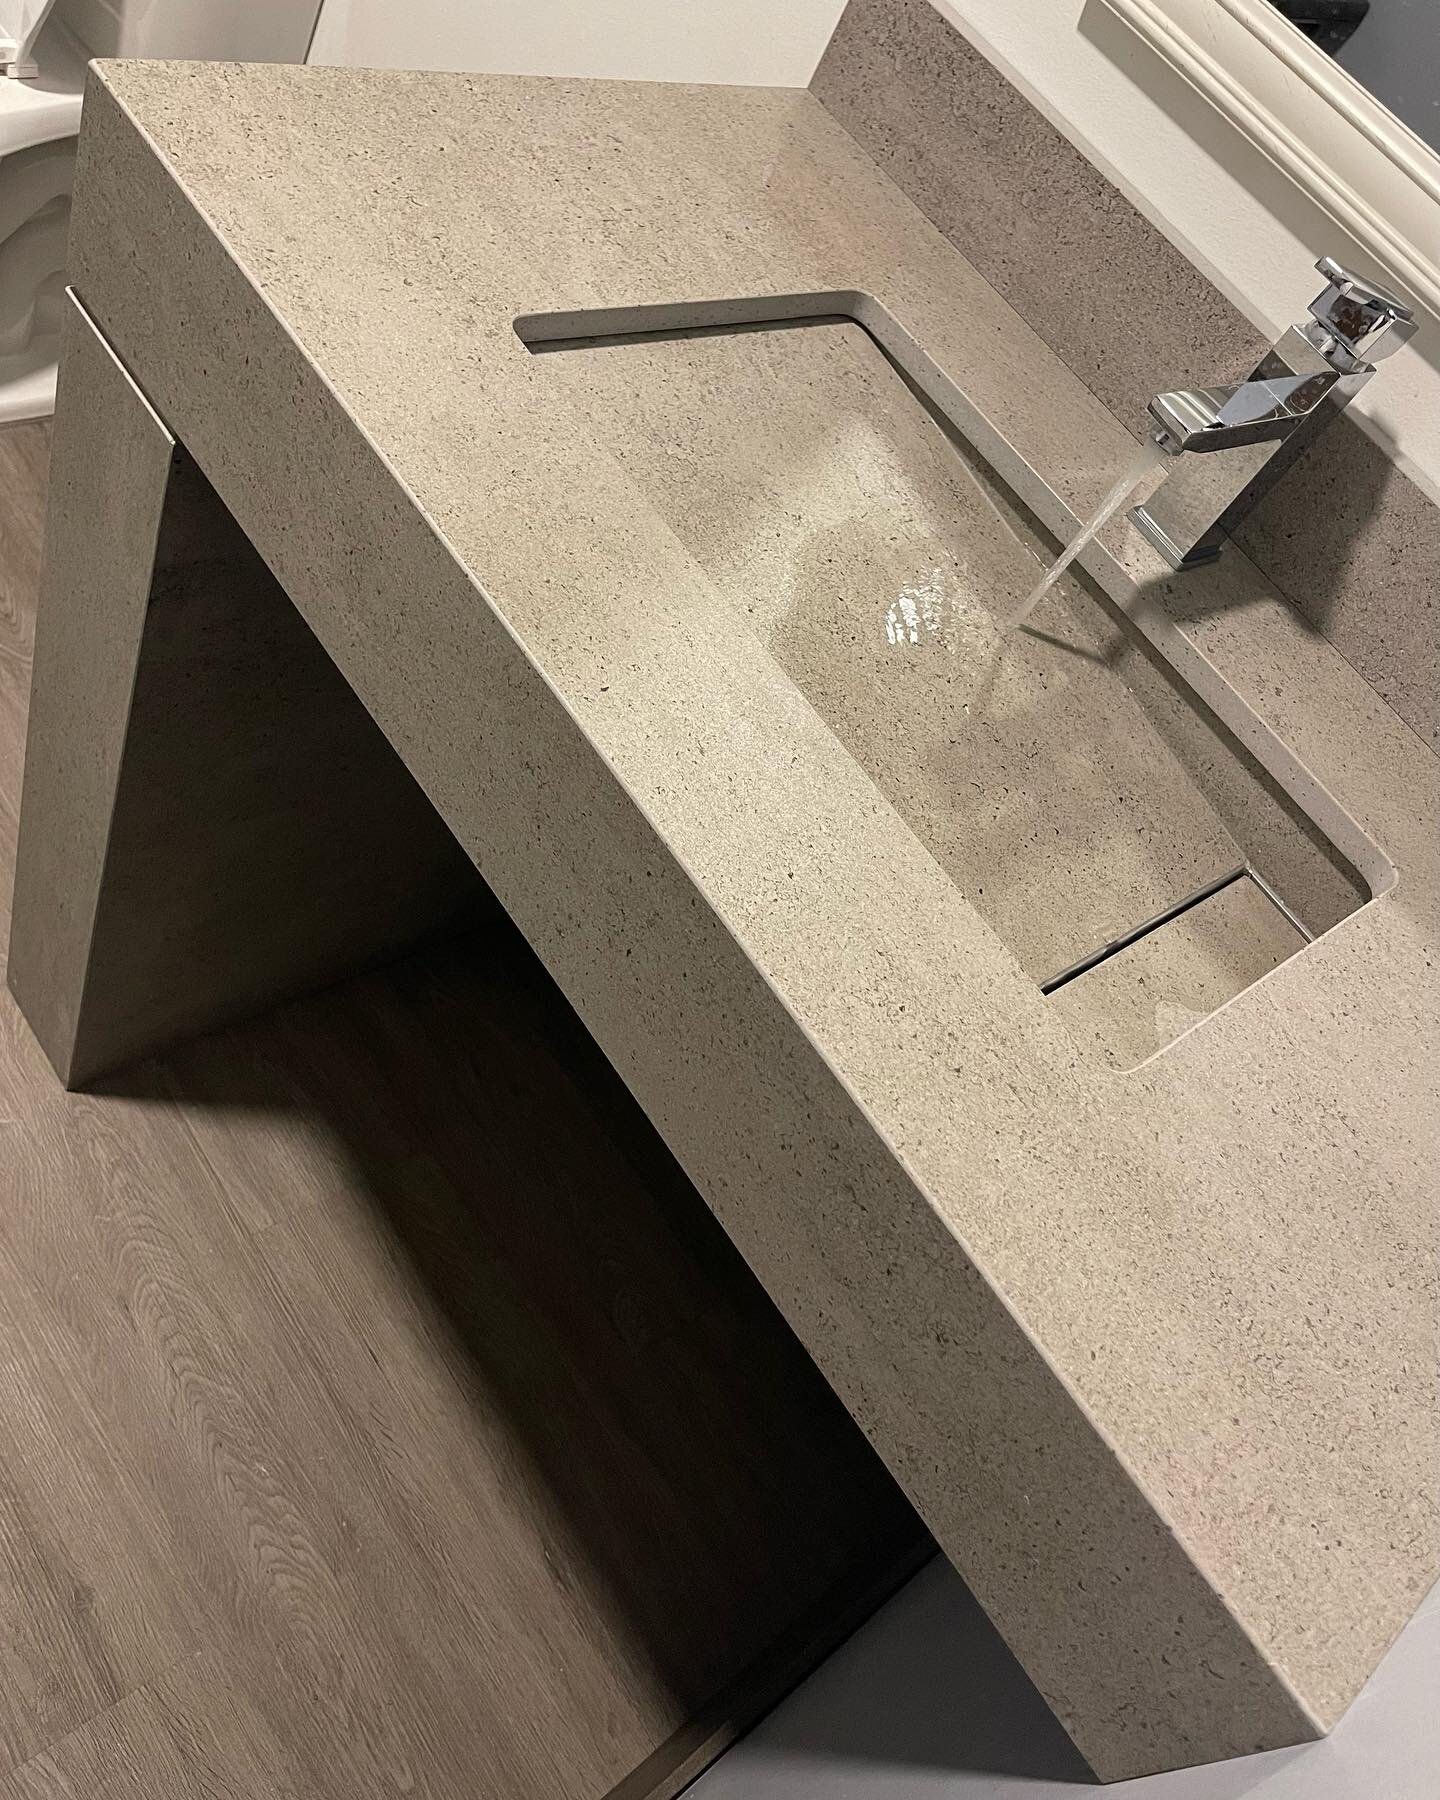 Shadow Edge with an all in one sink in &hellip;..you guessed it! Dekton.